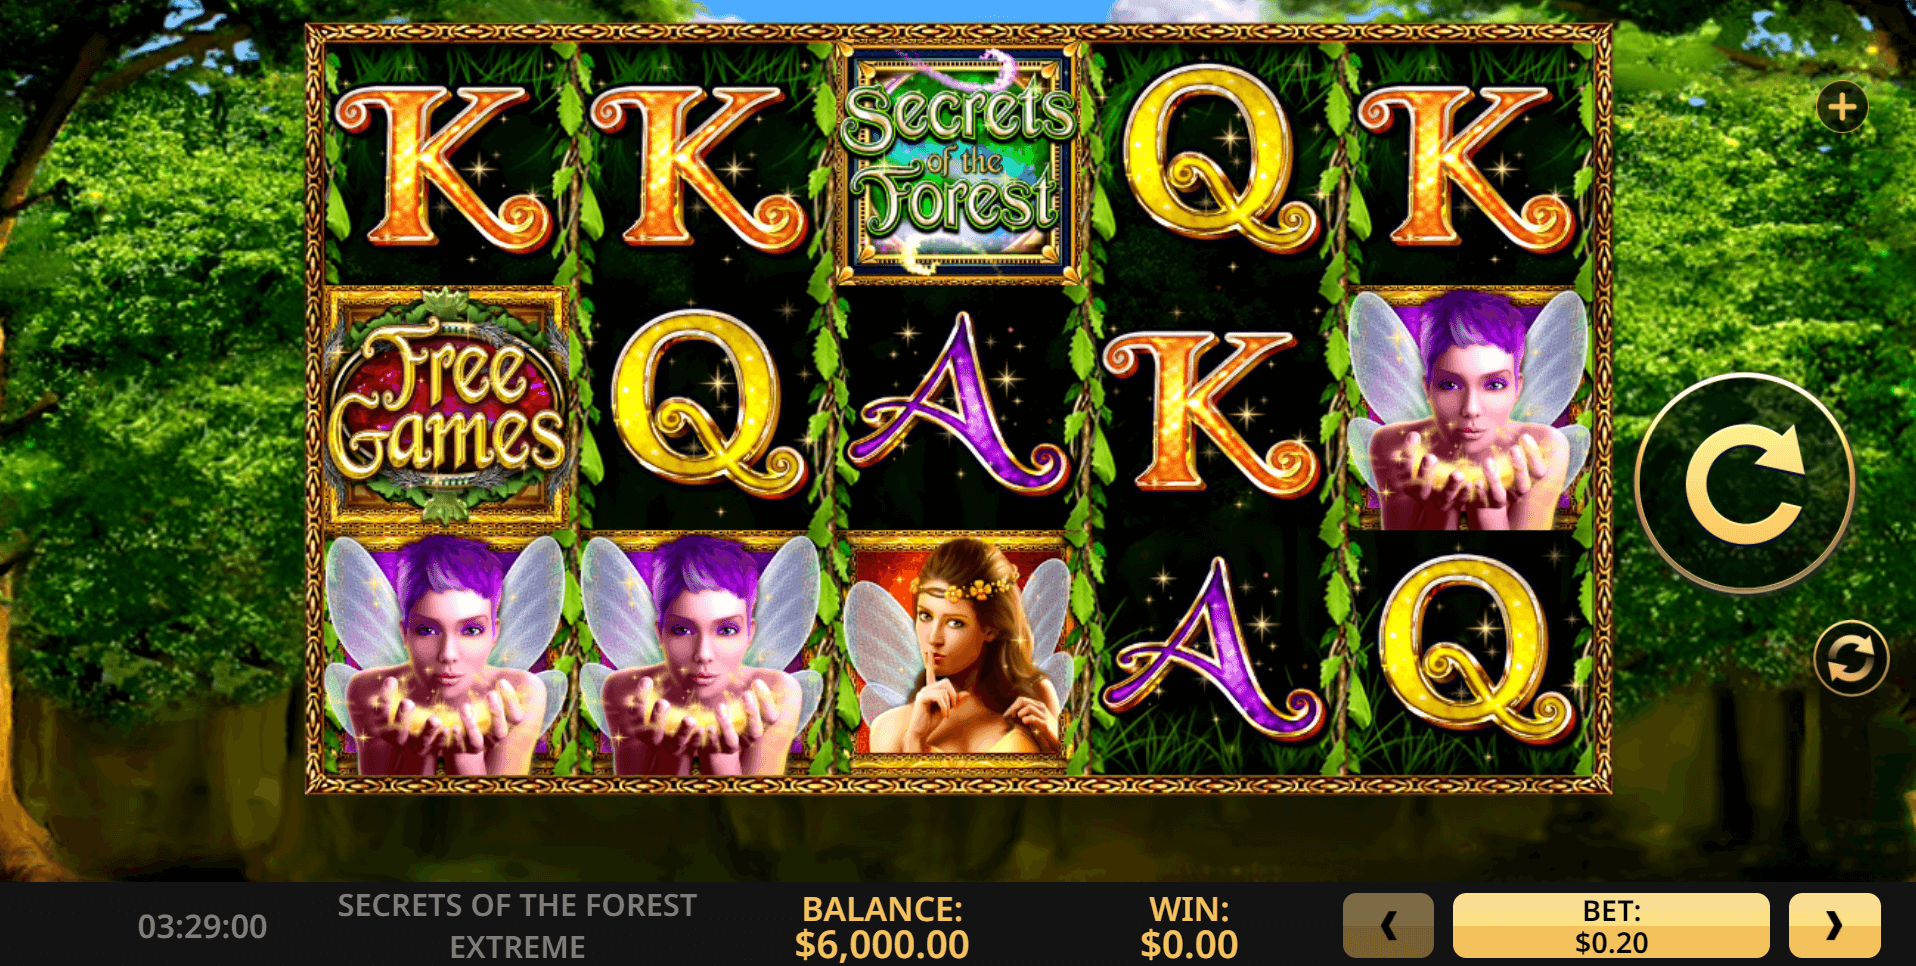 Secrets of the Forest Extreme slot play free